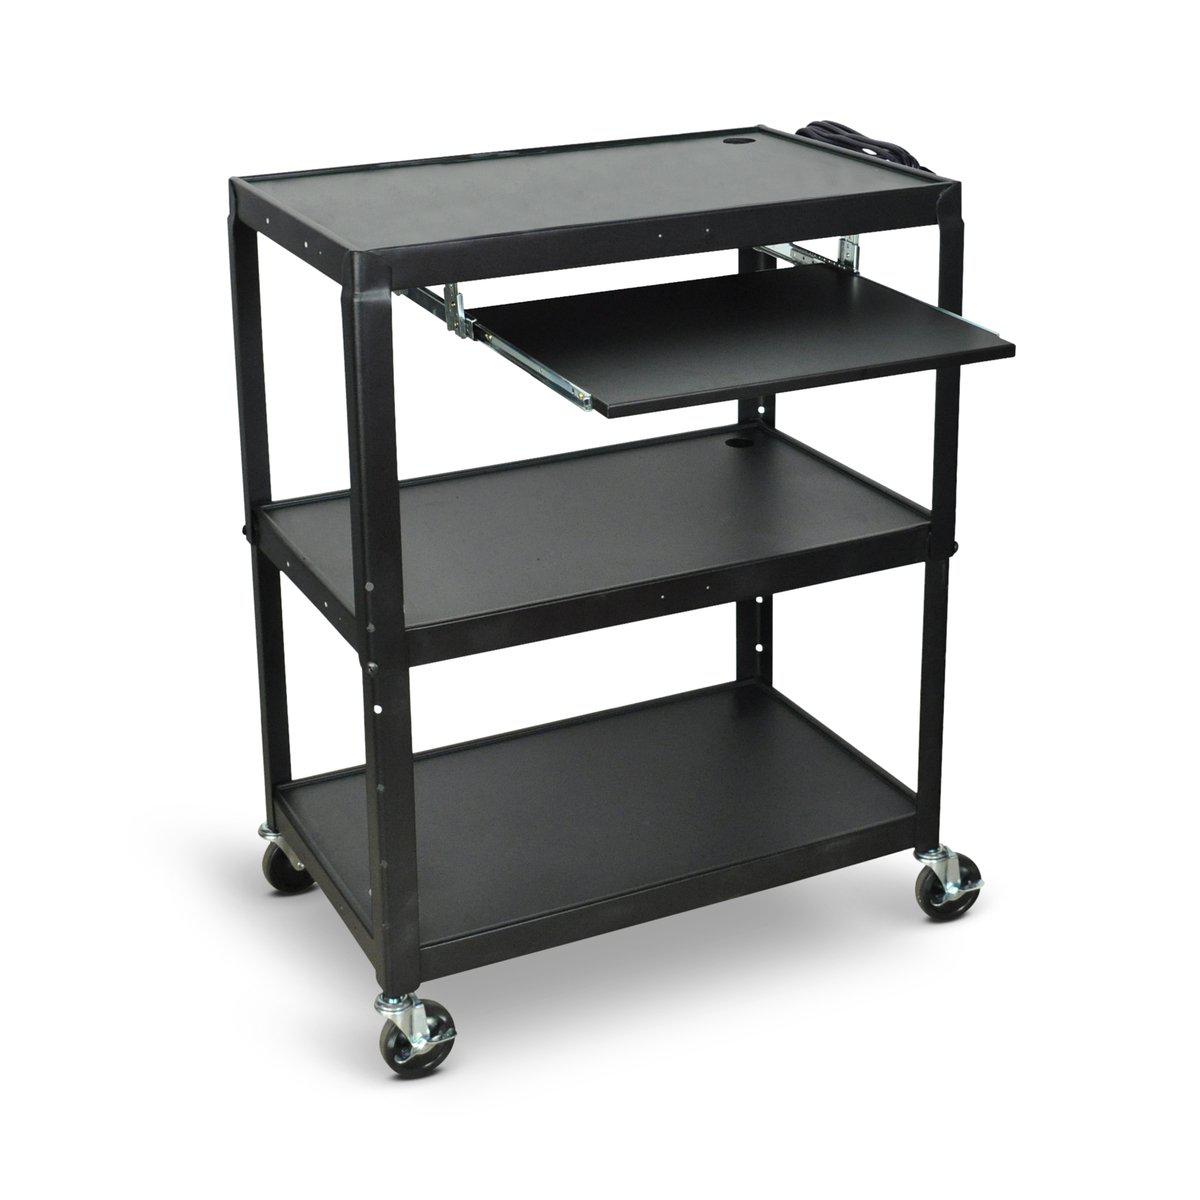 Extra Large Adjustable-Height Steel AV Cart with Pullout Keyboard Tray